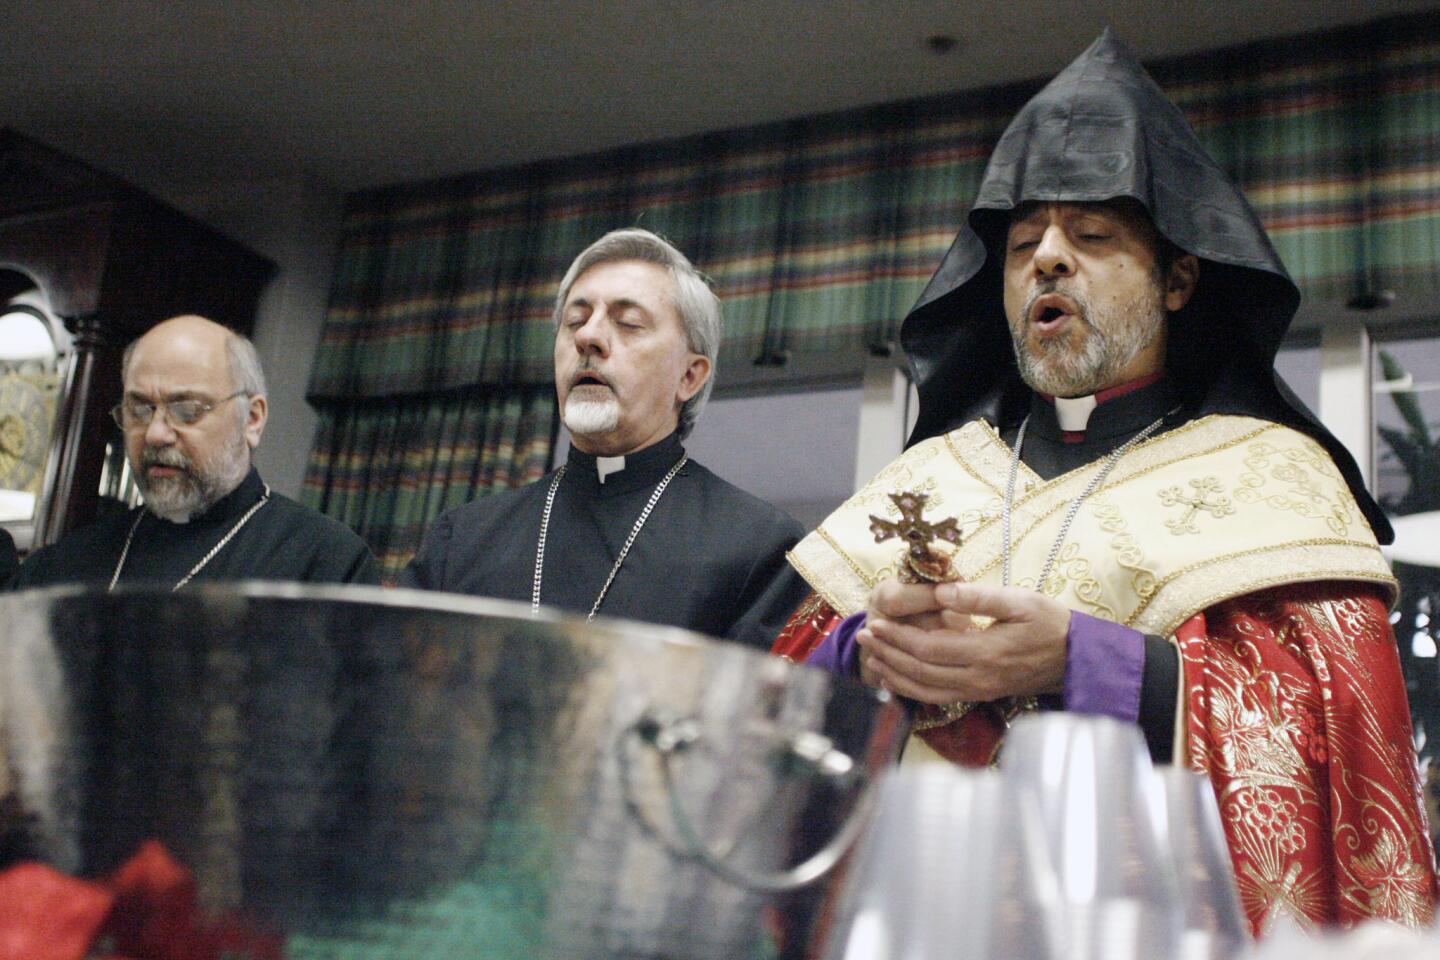 Father Sarkis Petoyan, from left, Father Hovsep Hagopian and Archbishop Hovnan Derderian sing a hymn before they bless the water and bread during an Armenian Christmas celebration, which took place at Glendale Adventist Medical Center on Thursday, January 5, 2012.